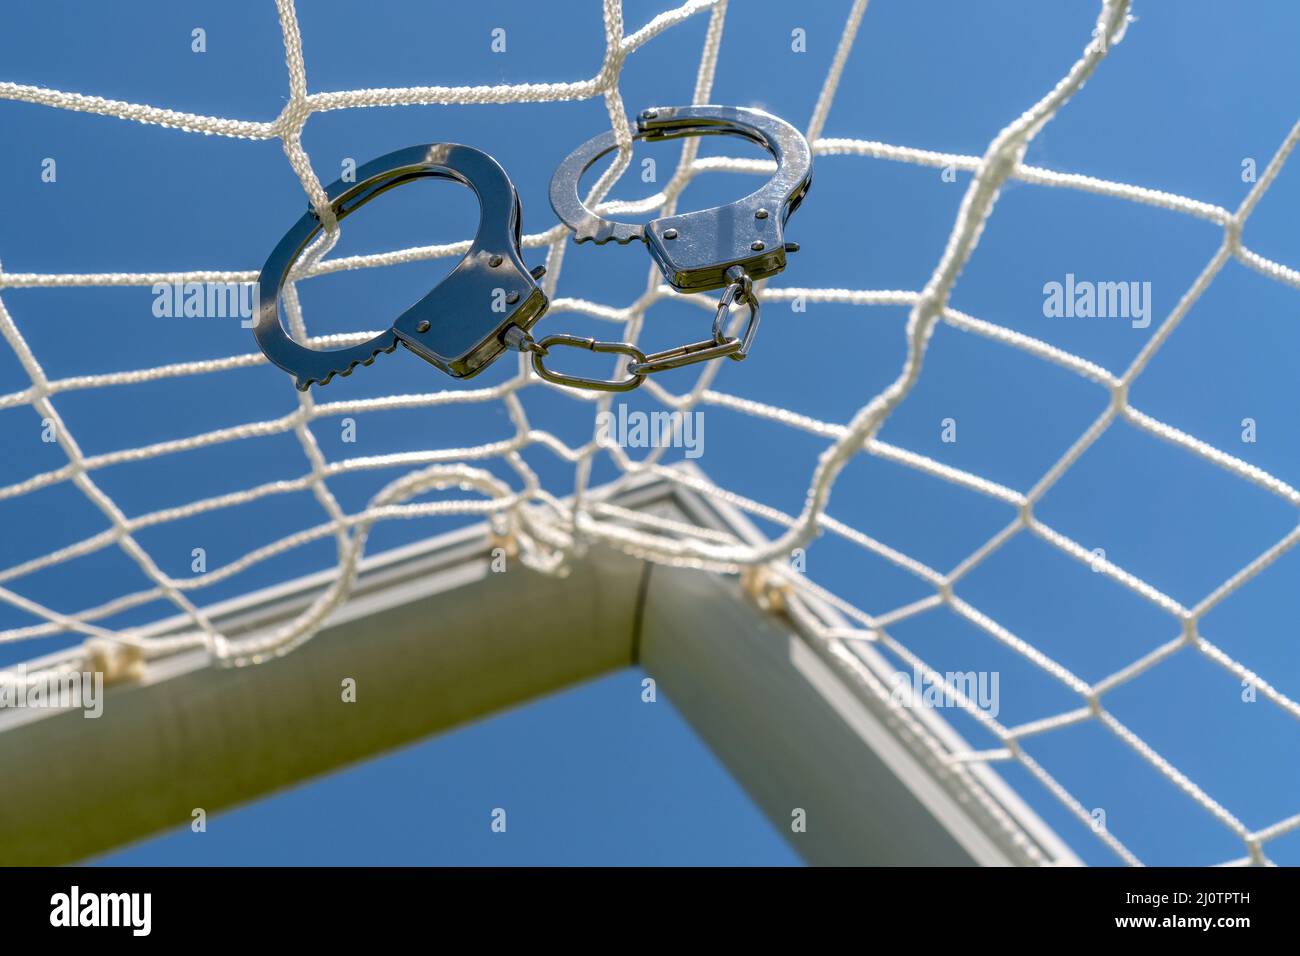 Handcuffs hanging on the net of a football goals Stock Photo